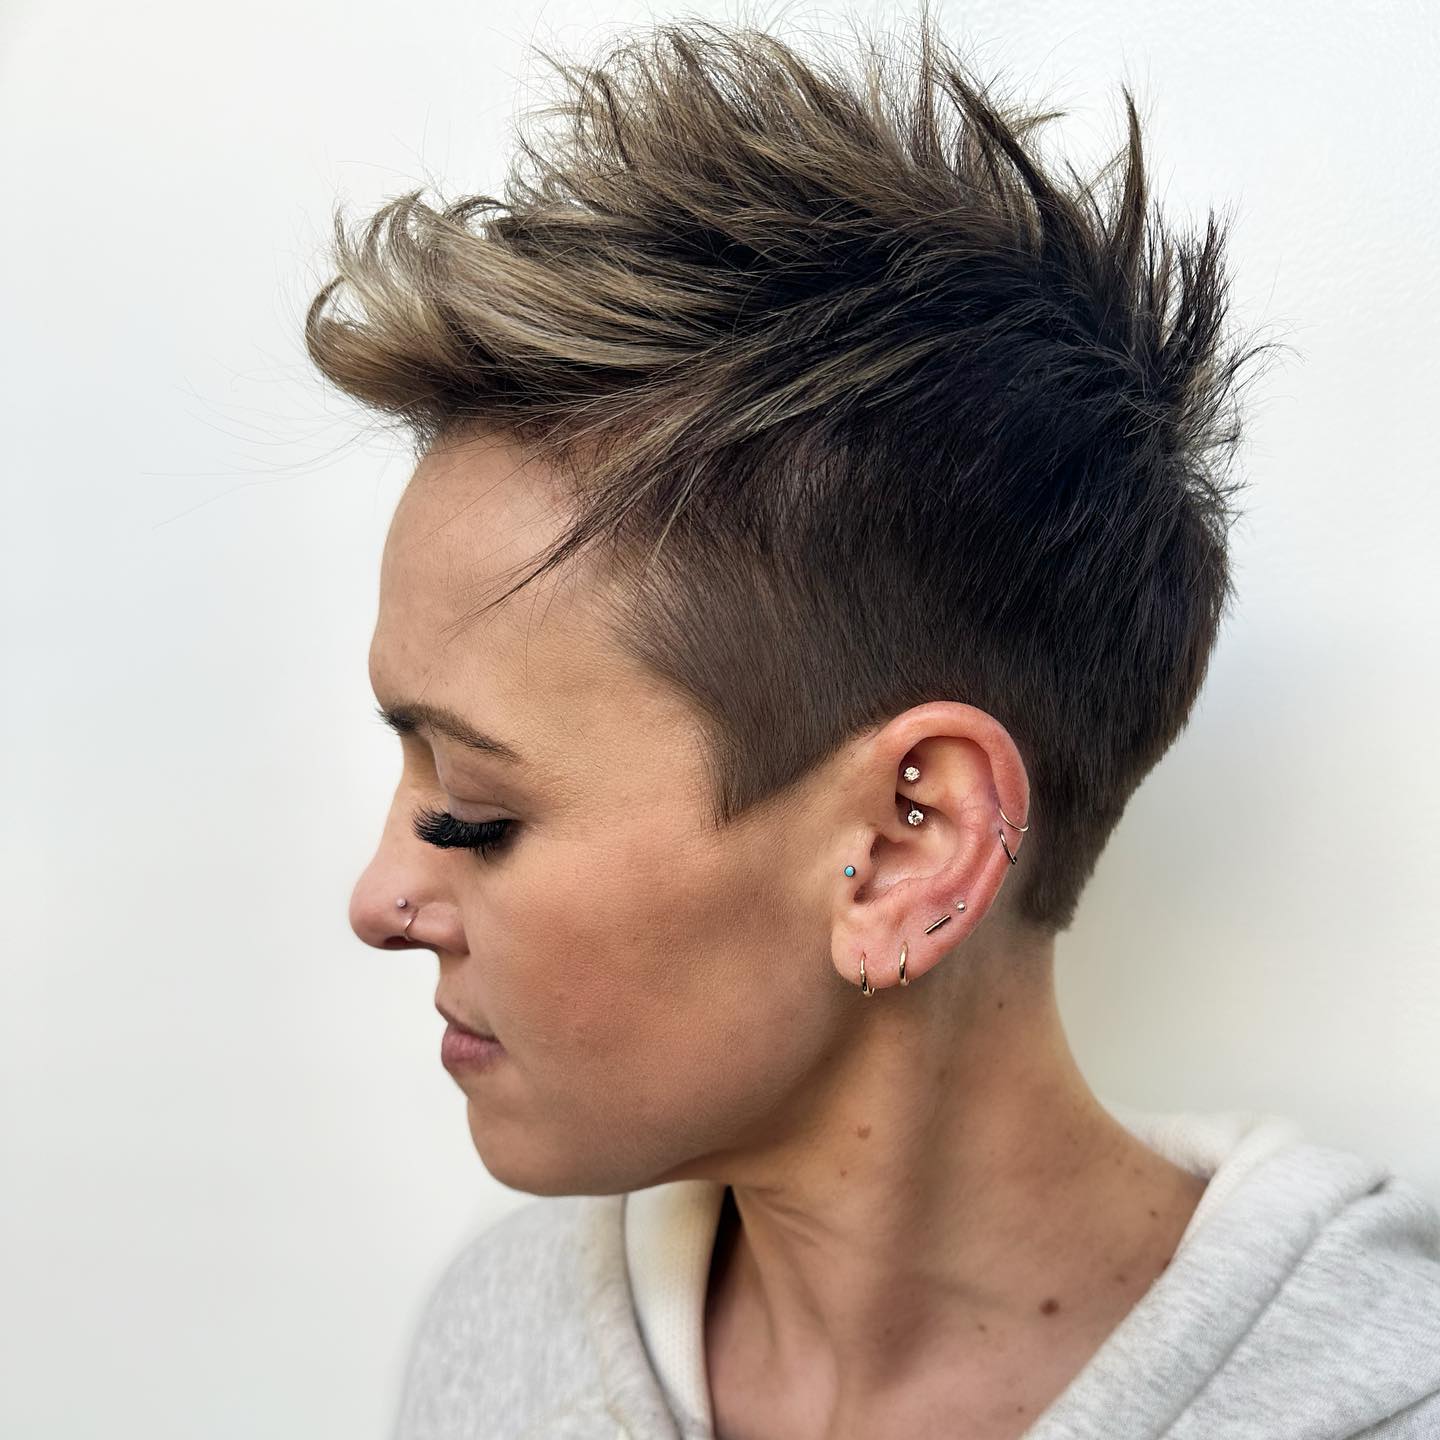 Spiky Pixie Cut with Blonde Highlights